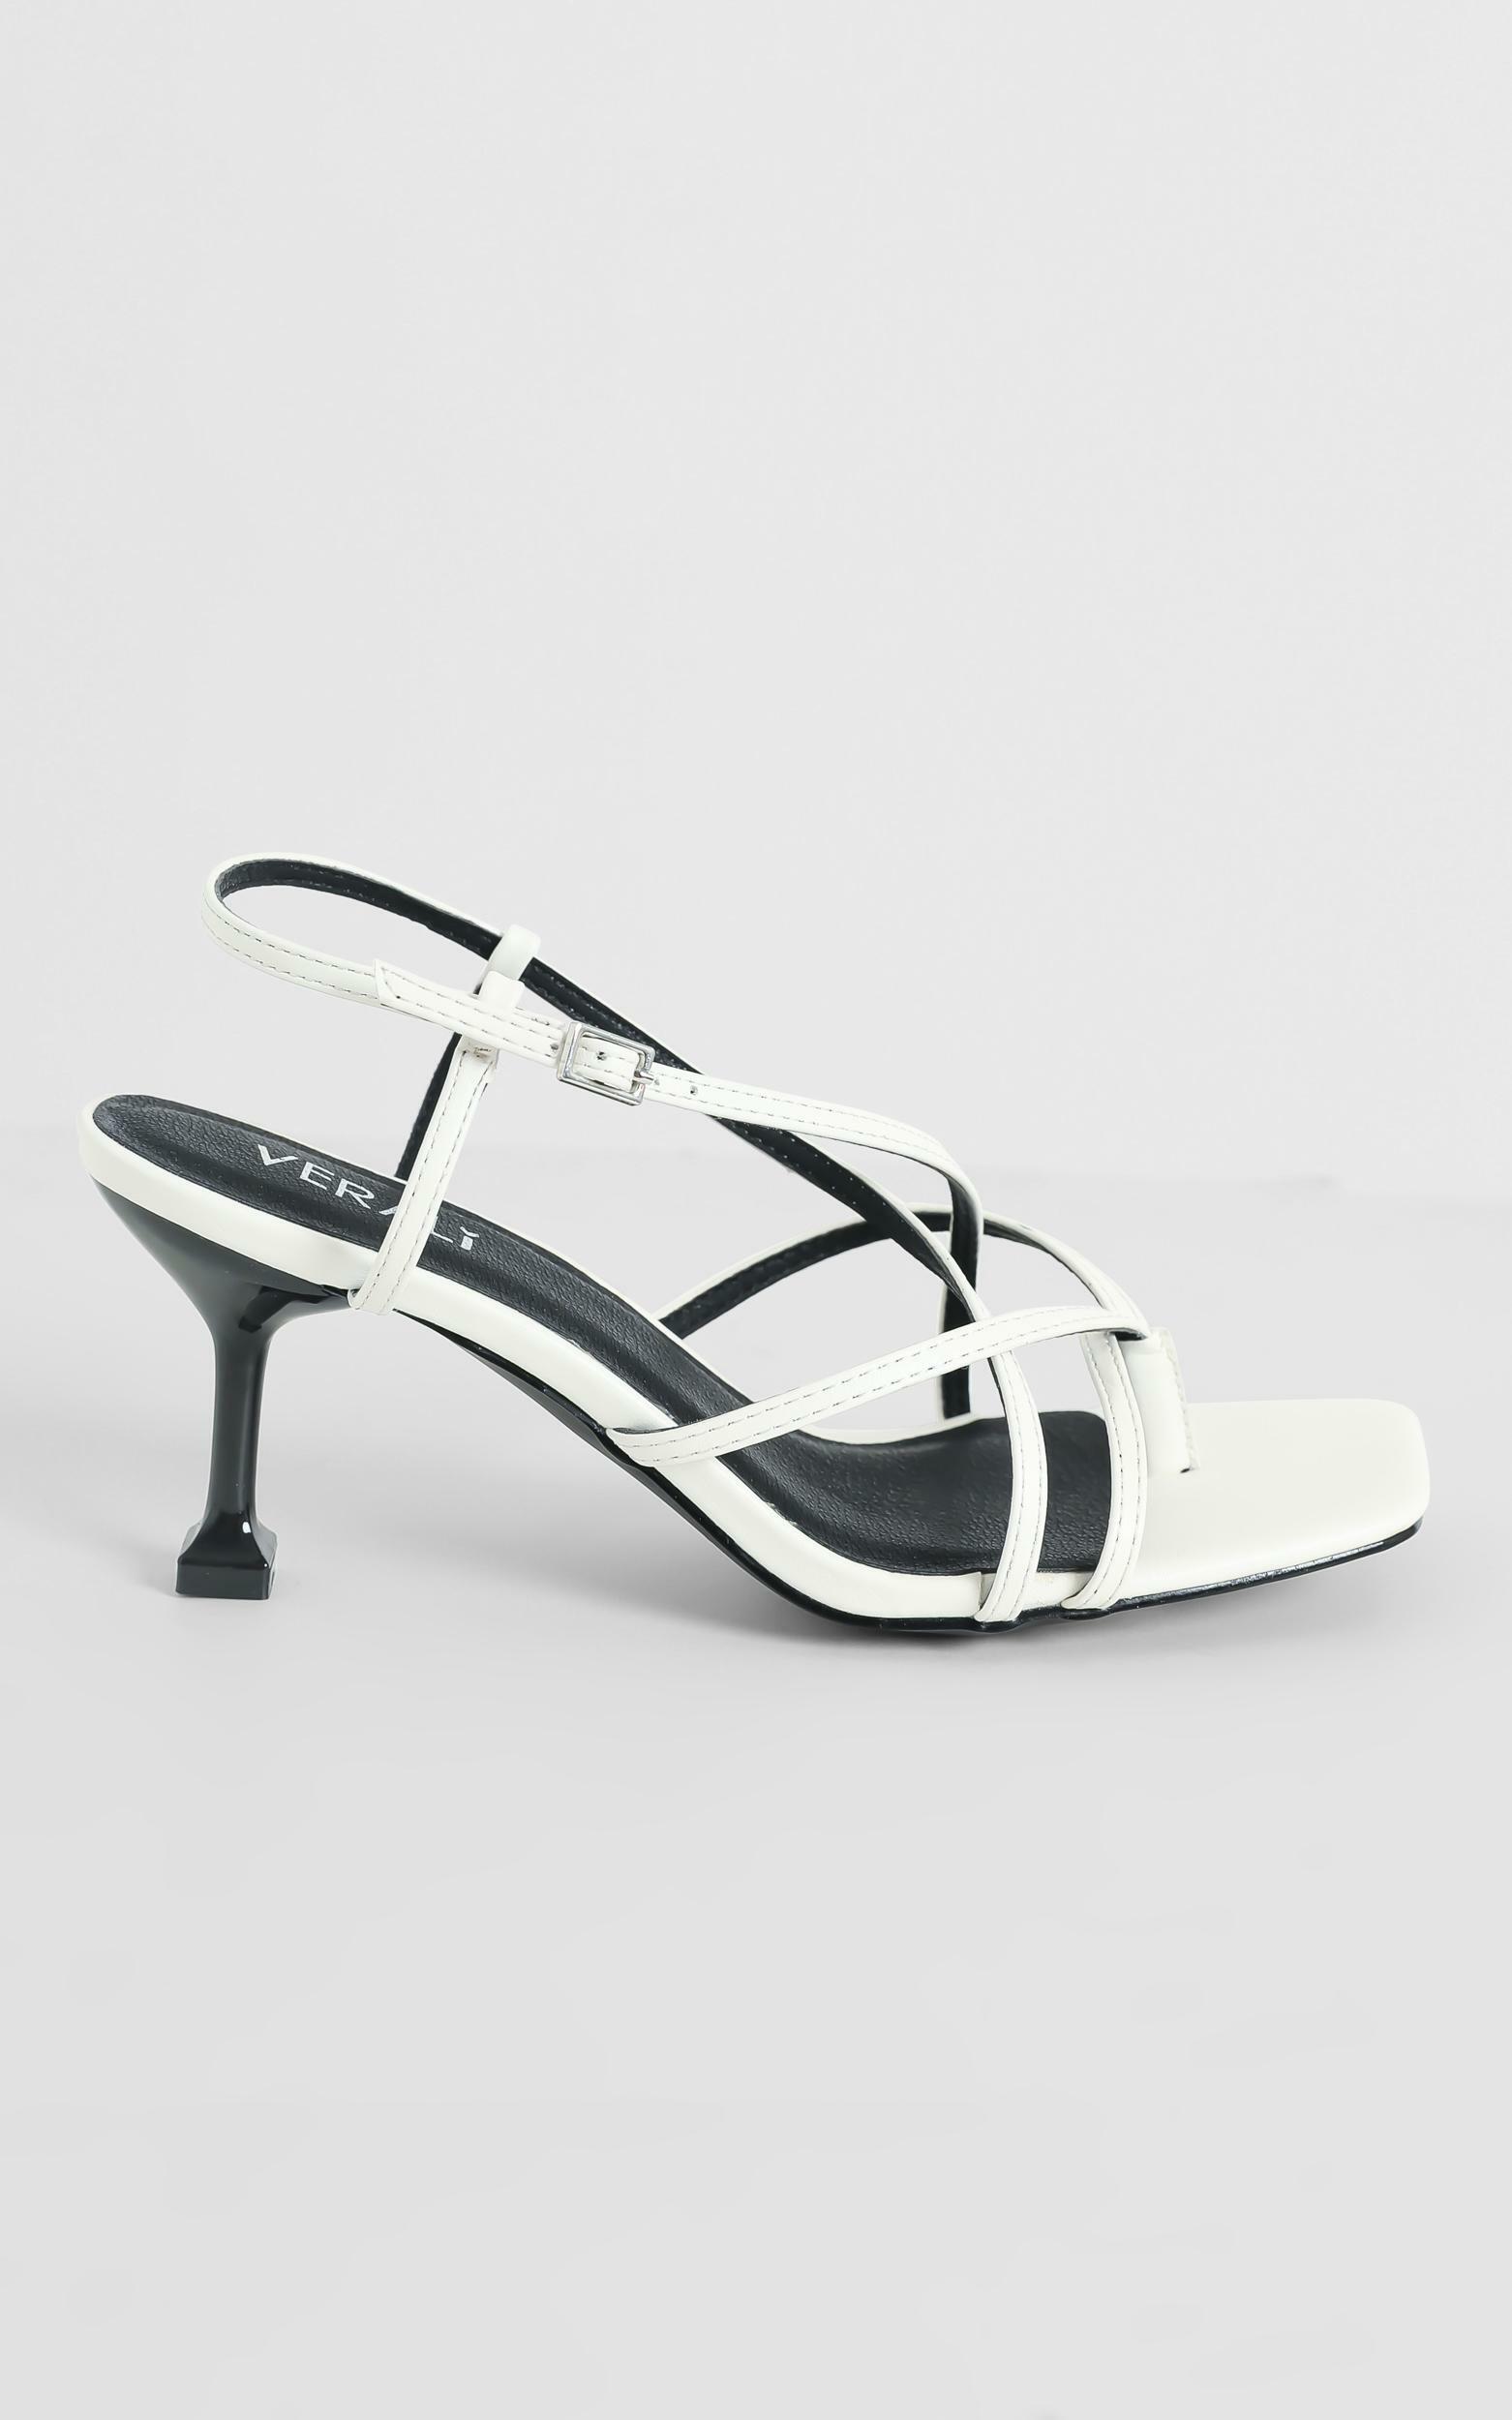 Verali - Neve Heels in White - 09, WHT1, hi-res image number null